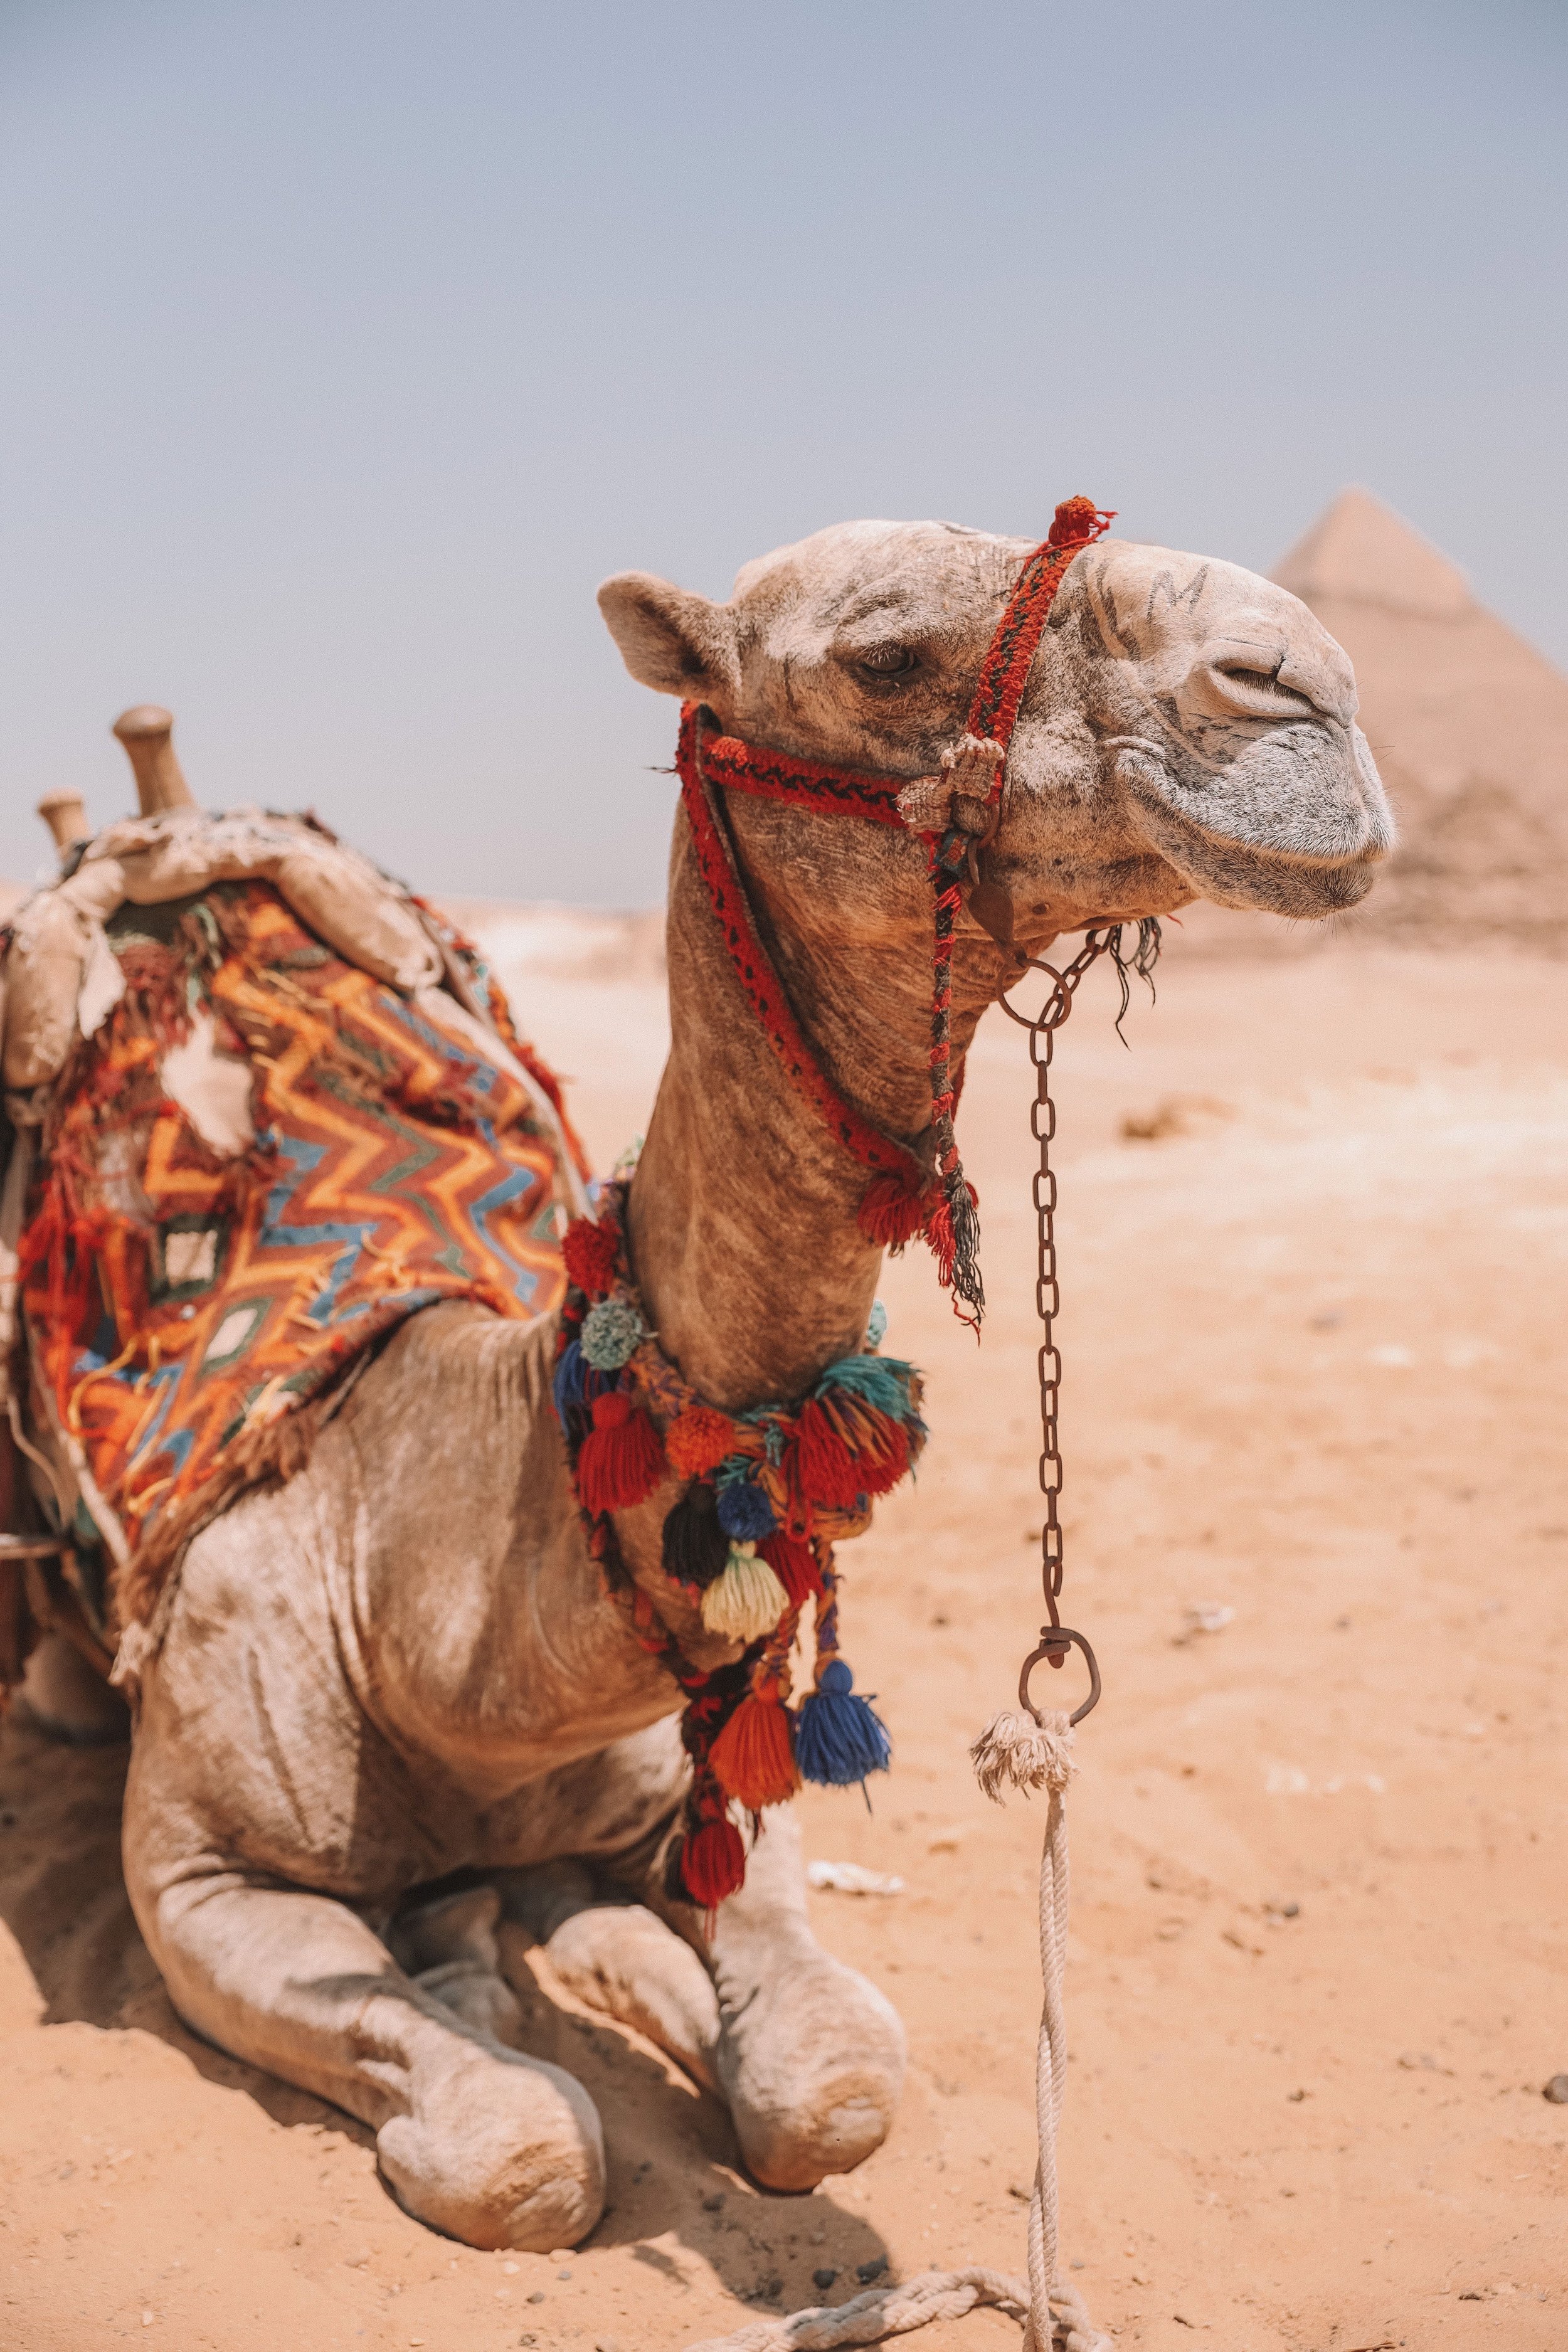 Camel taking a rest at the Great Pyramids of Giza - Cairo - Egypt